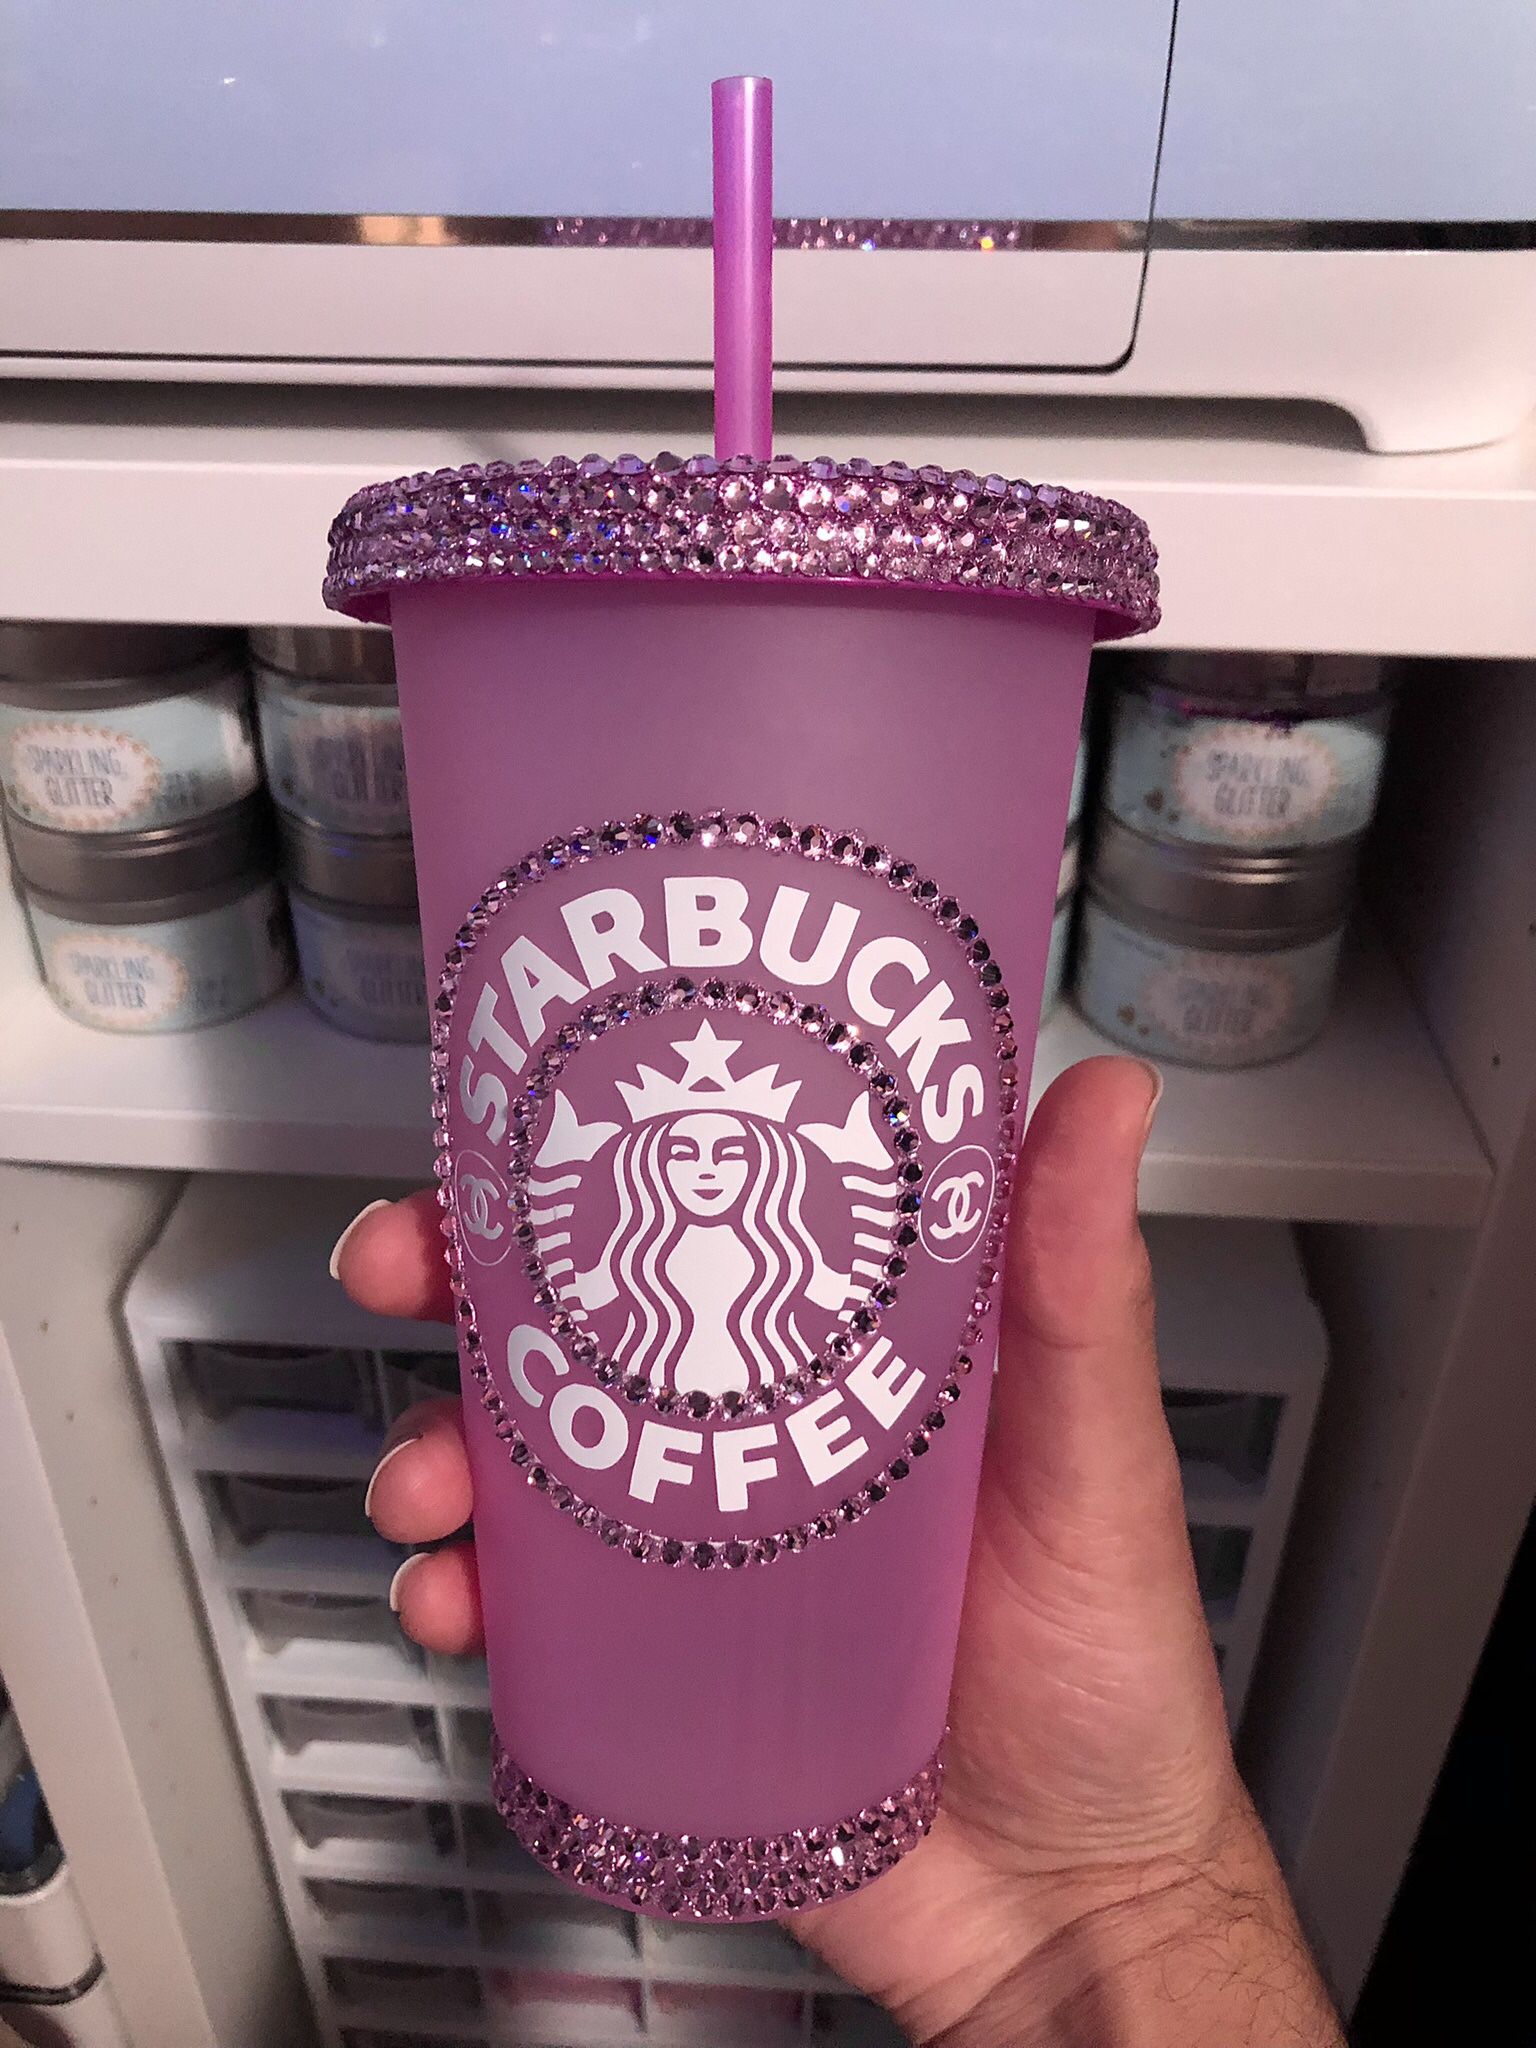 Rose Gold Starbucks Cup- New for Sale in Paramus, NJ - OfferUp